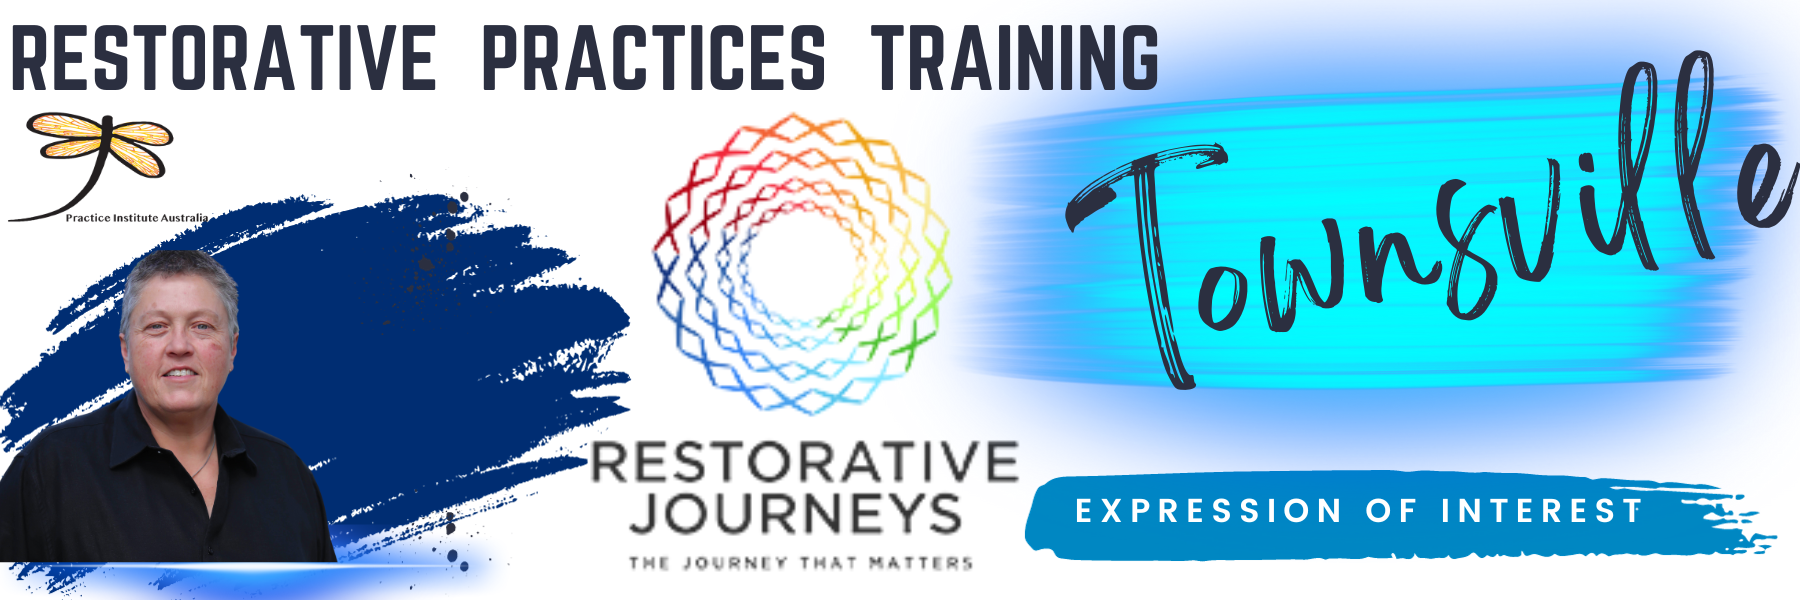 Townsville | Restorative Practices Training facilitated by Restorative Journeys- Expression of Interest